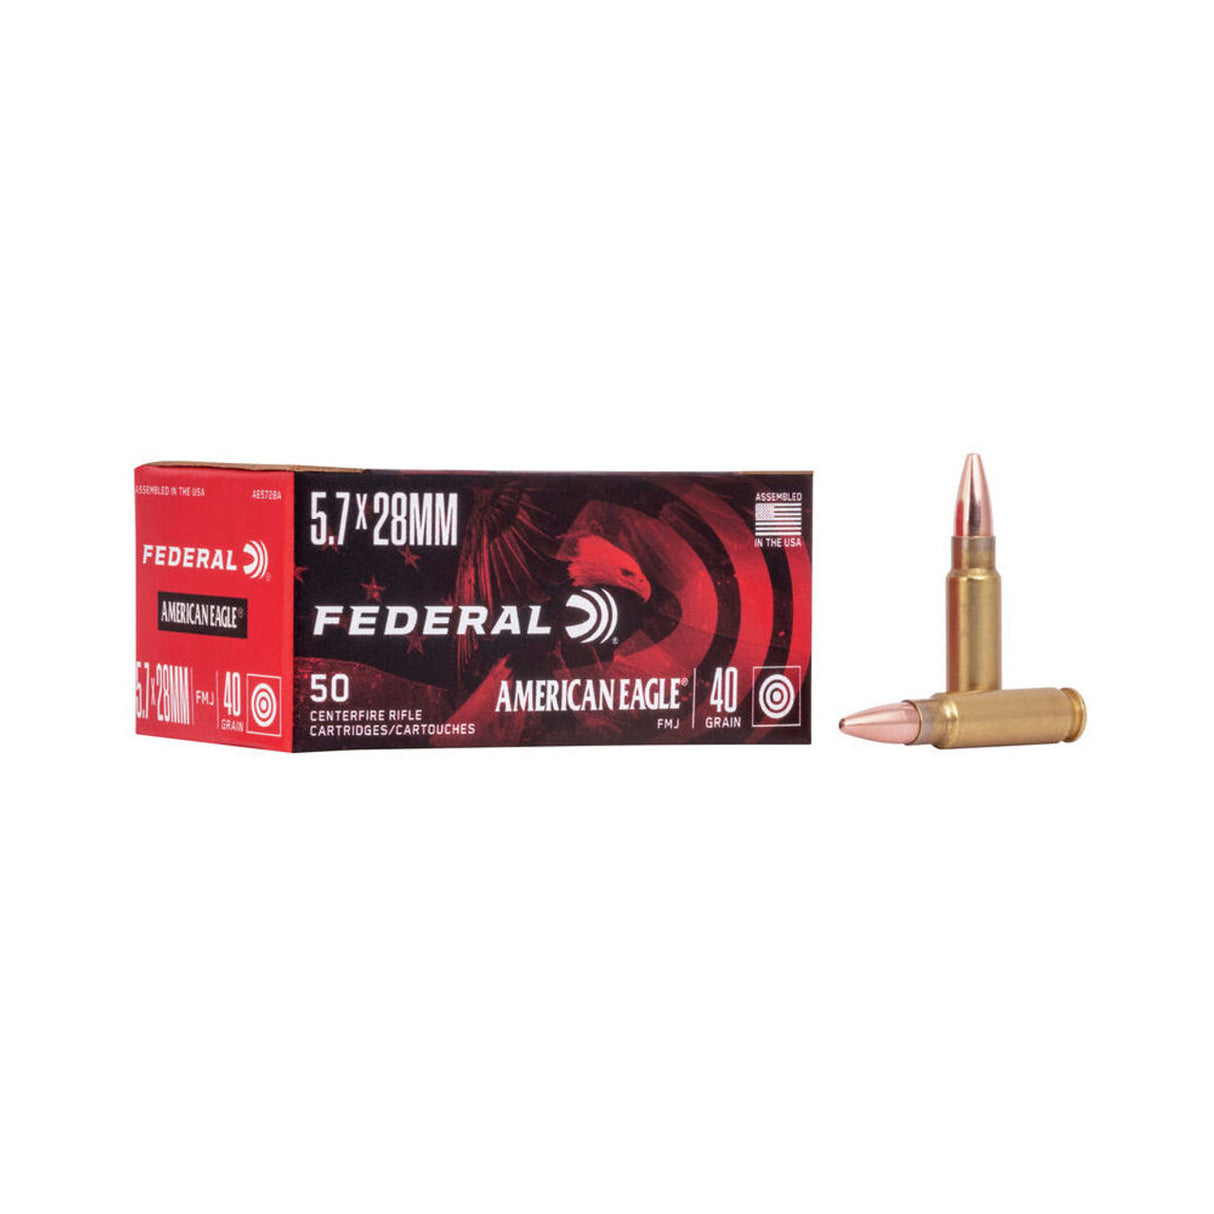 FED 5.7x28MM 40 GR FMJ, P90, BOX OF 50RDS